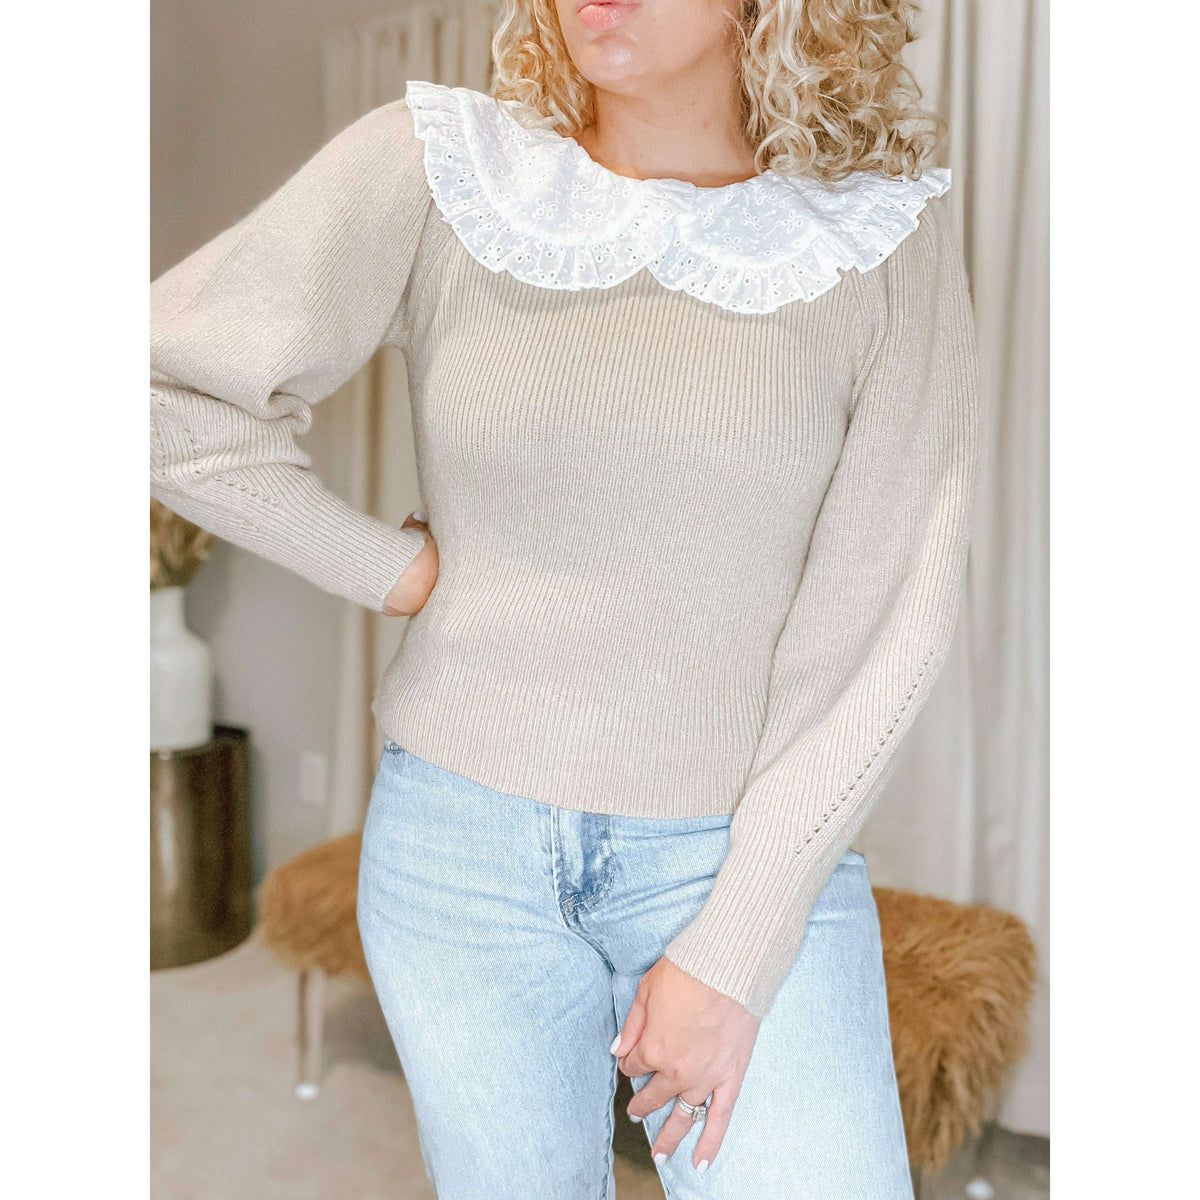 Mary Ruffle Collar Sweater - The Hive by Chris Jesselle